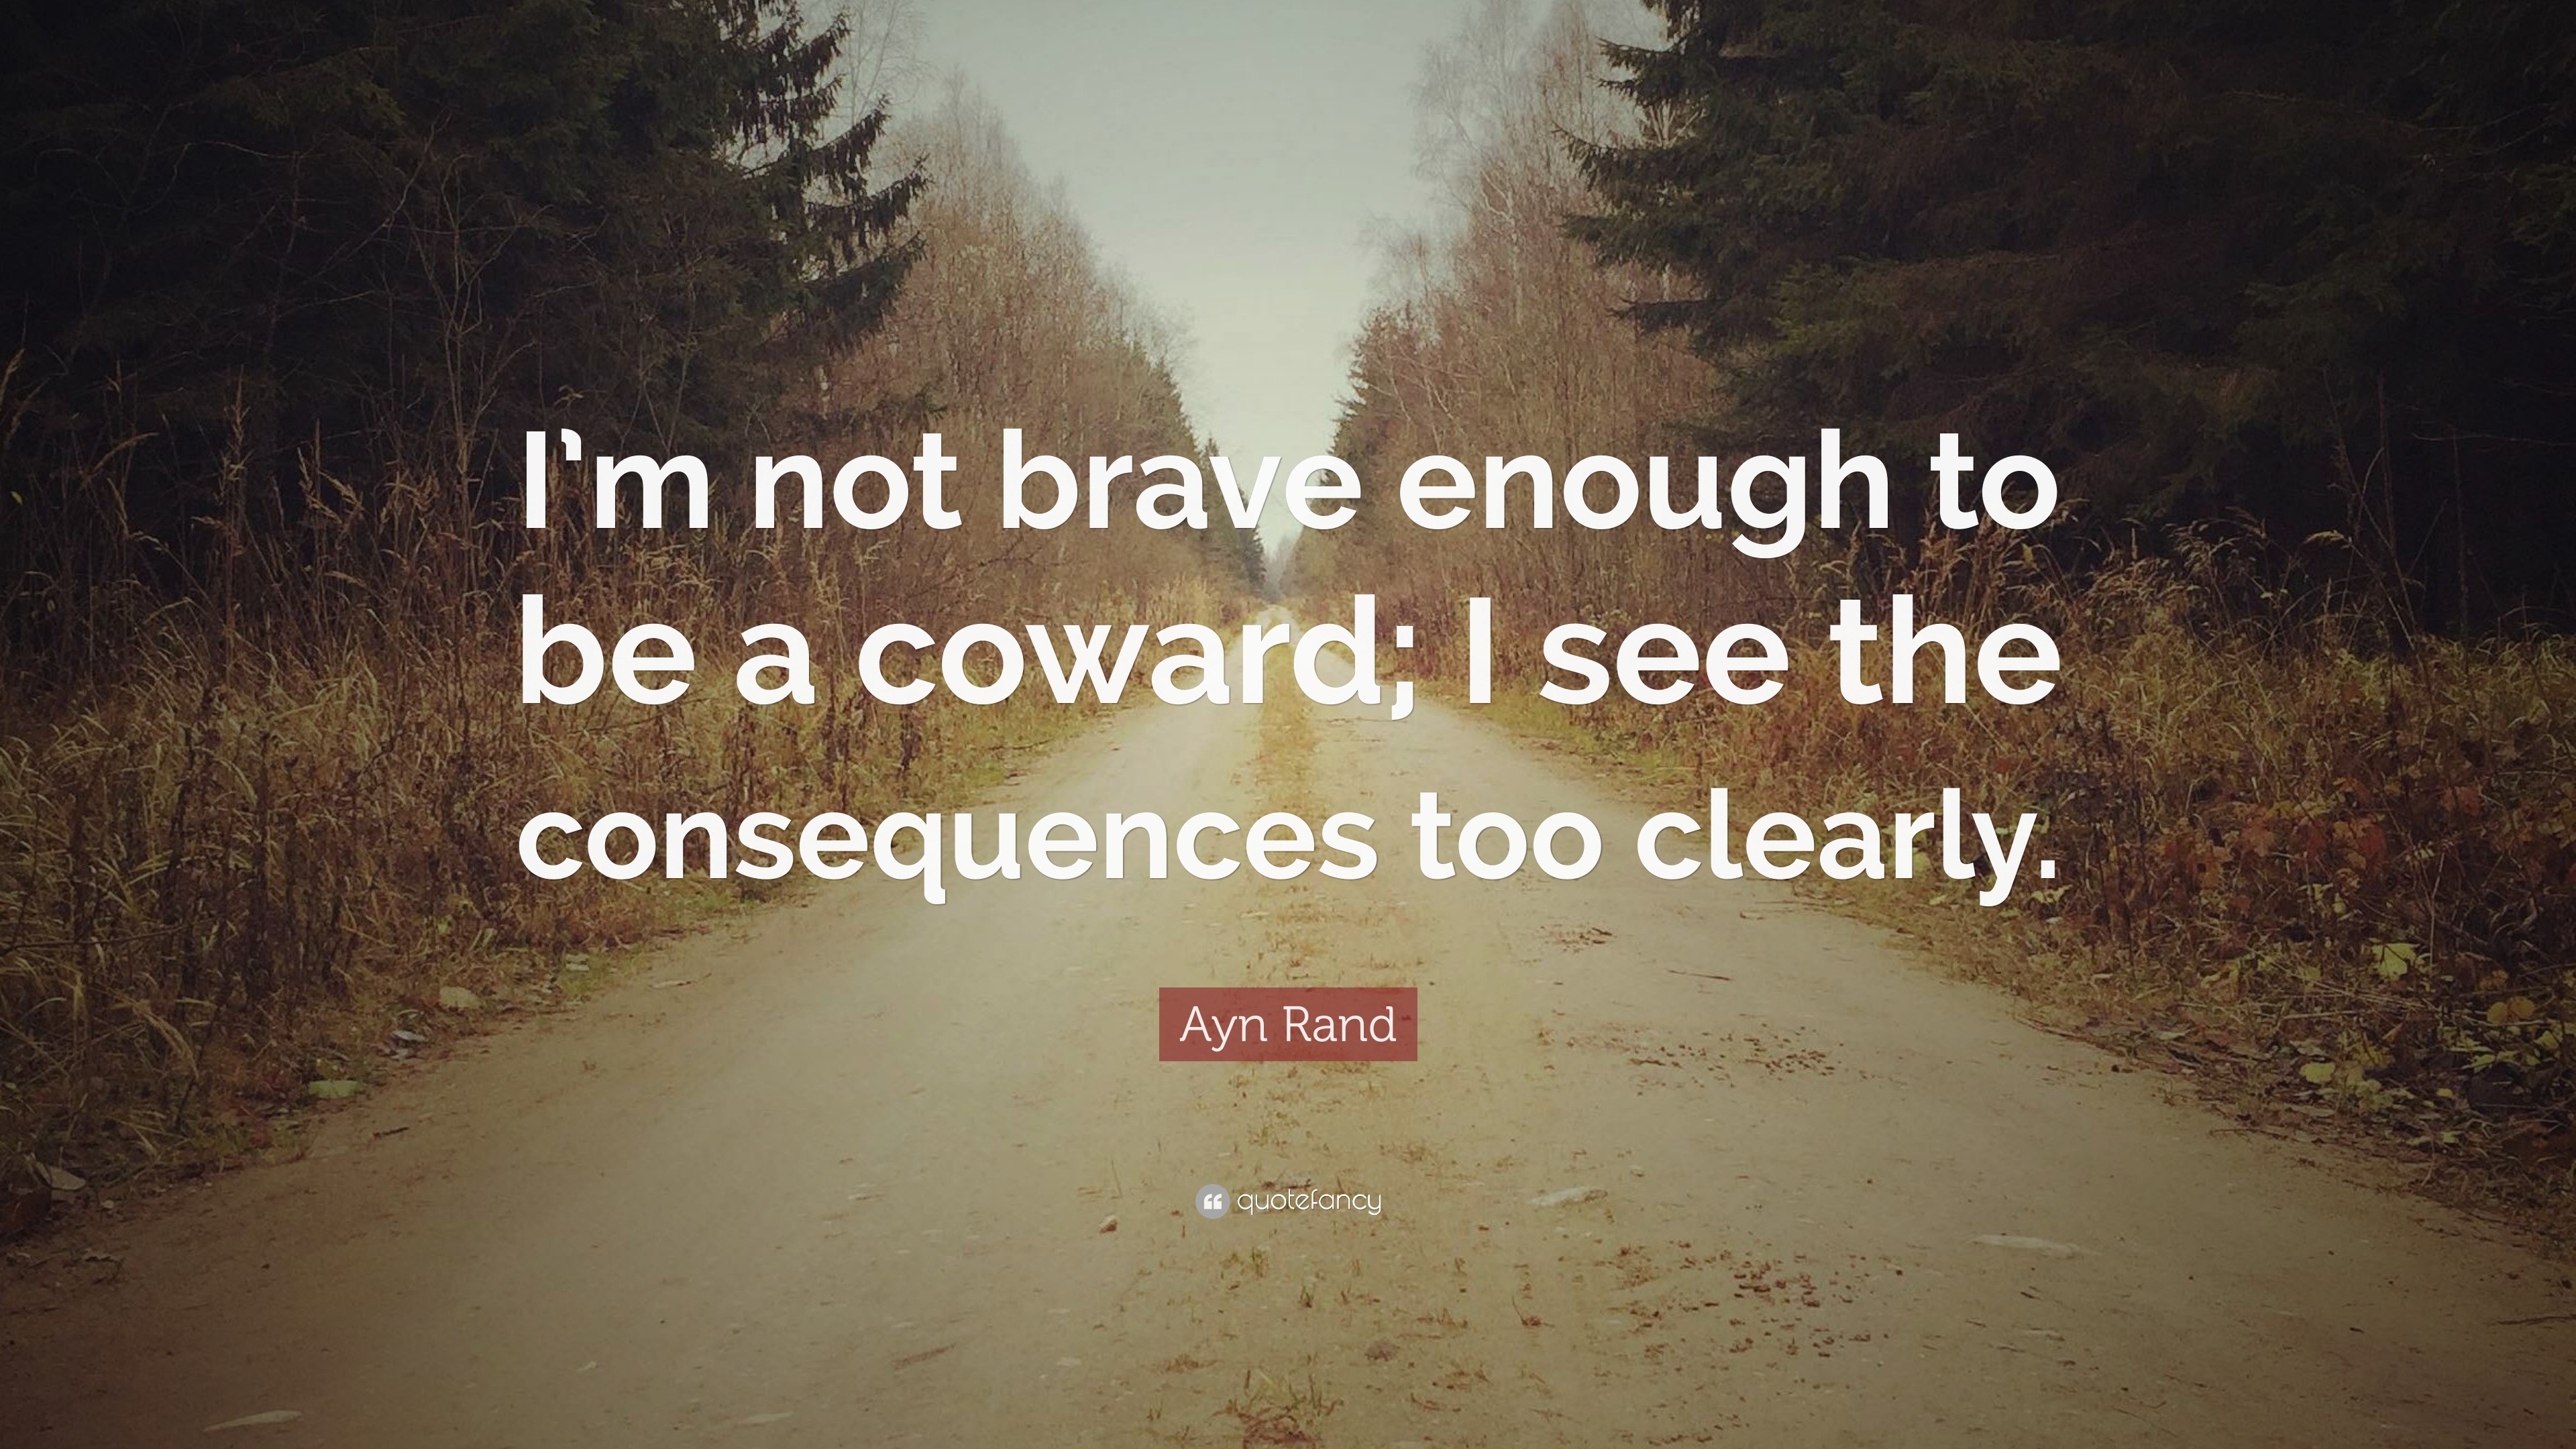 Ayn Rand Quote: “I'm not brave enough to be a coward; I see the ...